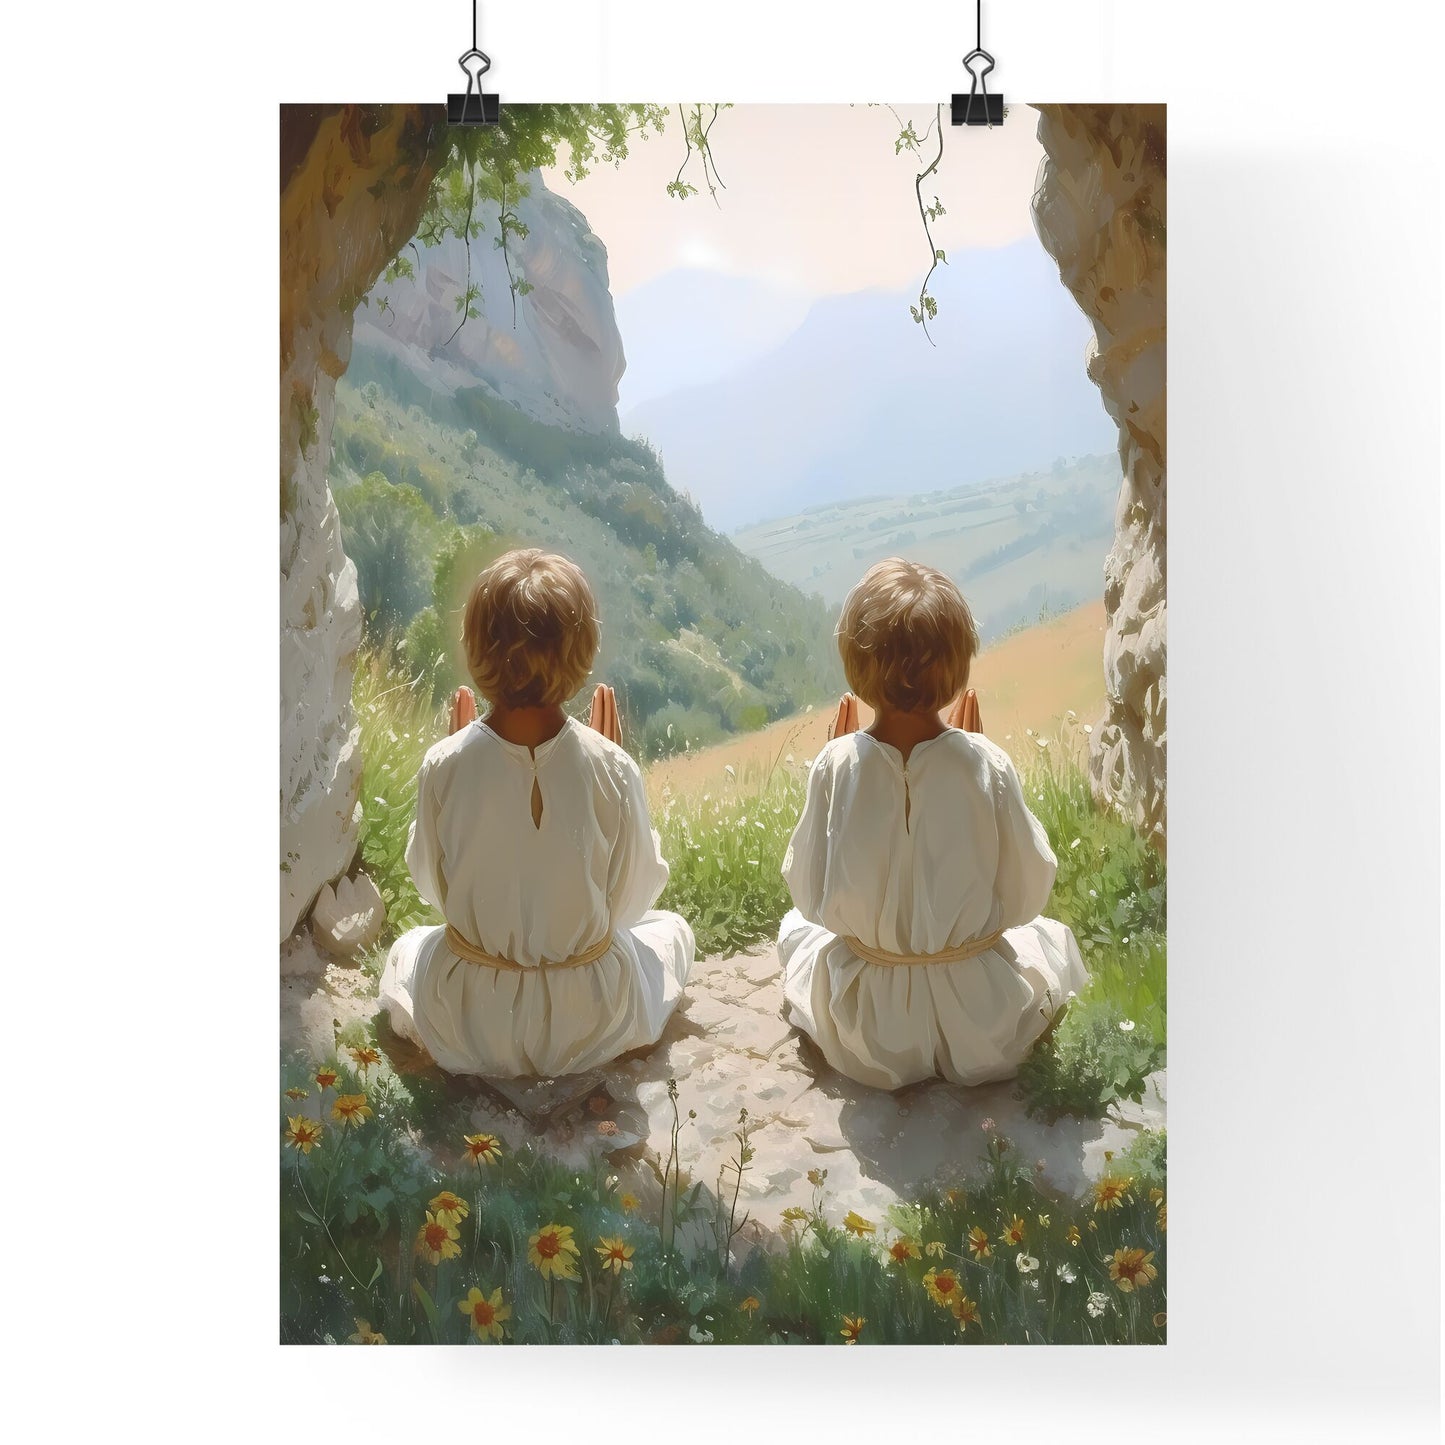 Two young man, Cain and Abel, praying to God in a sacred place - Art print of two children sitting in a cave looking at a valley Default Title